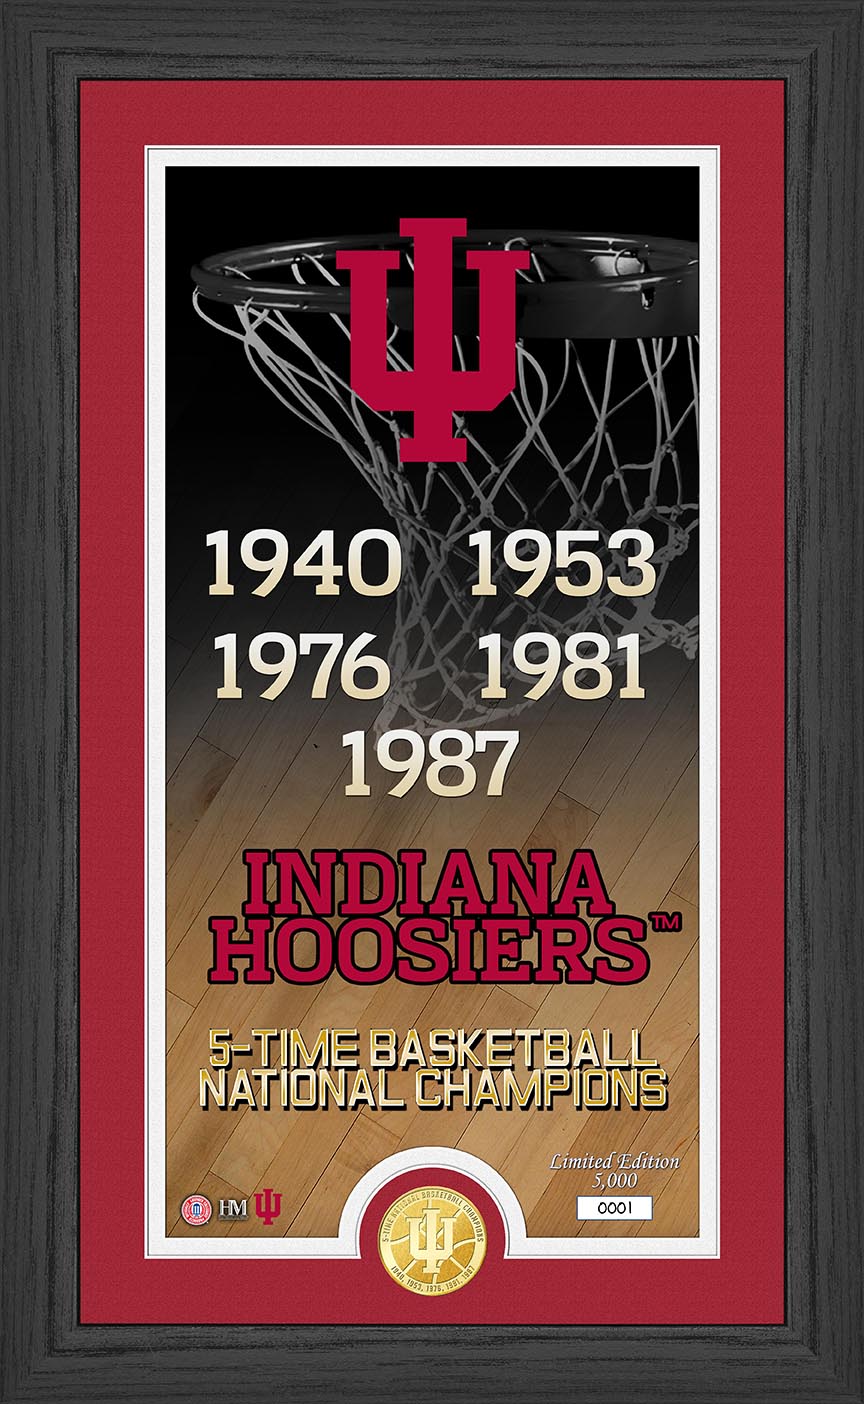 Indiana Hoosiers 5 Time Basketball National Champions Bronze Coin Photo Mint